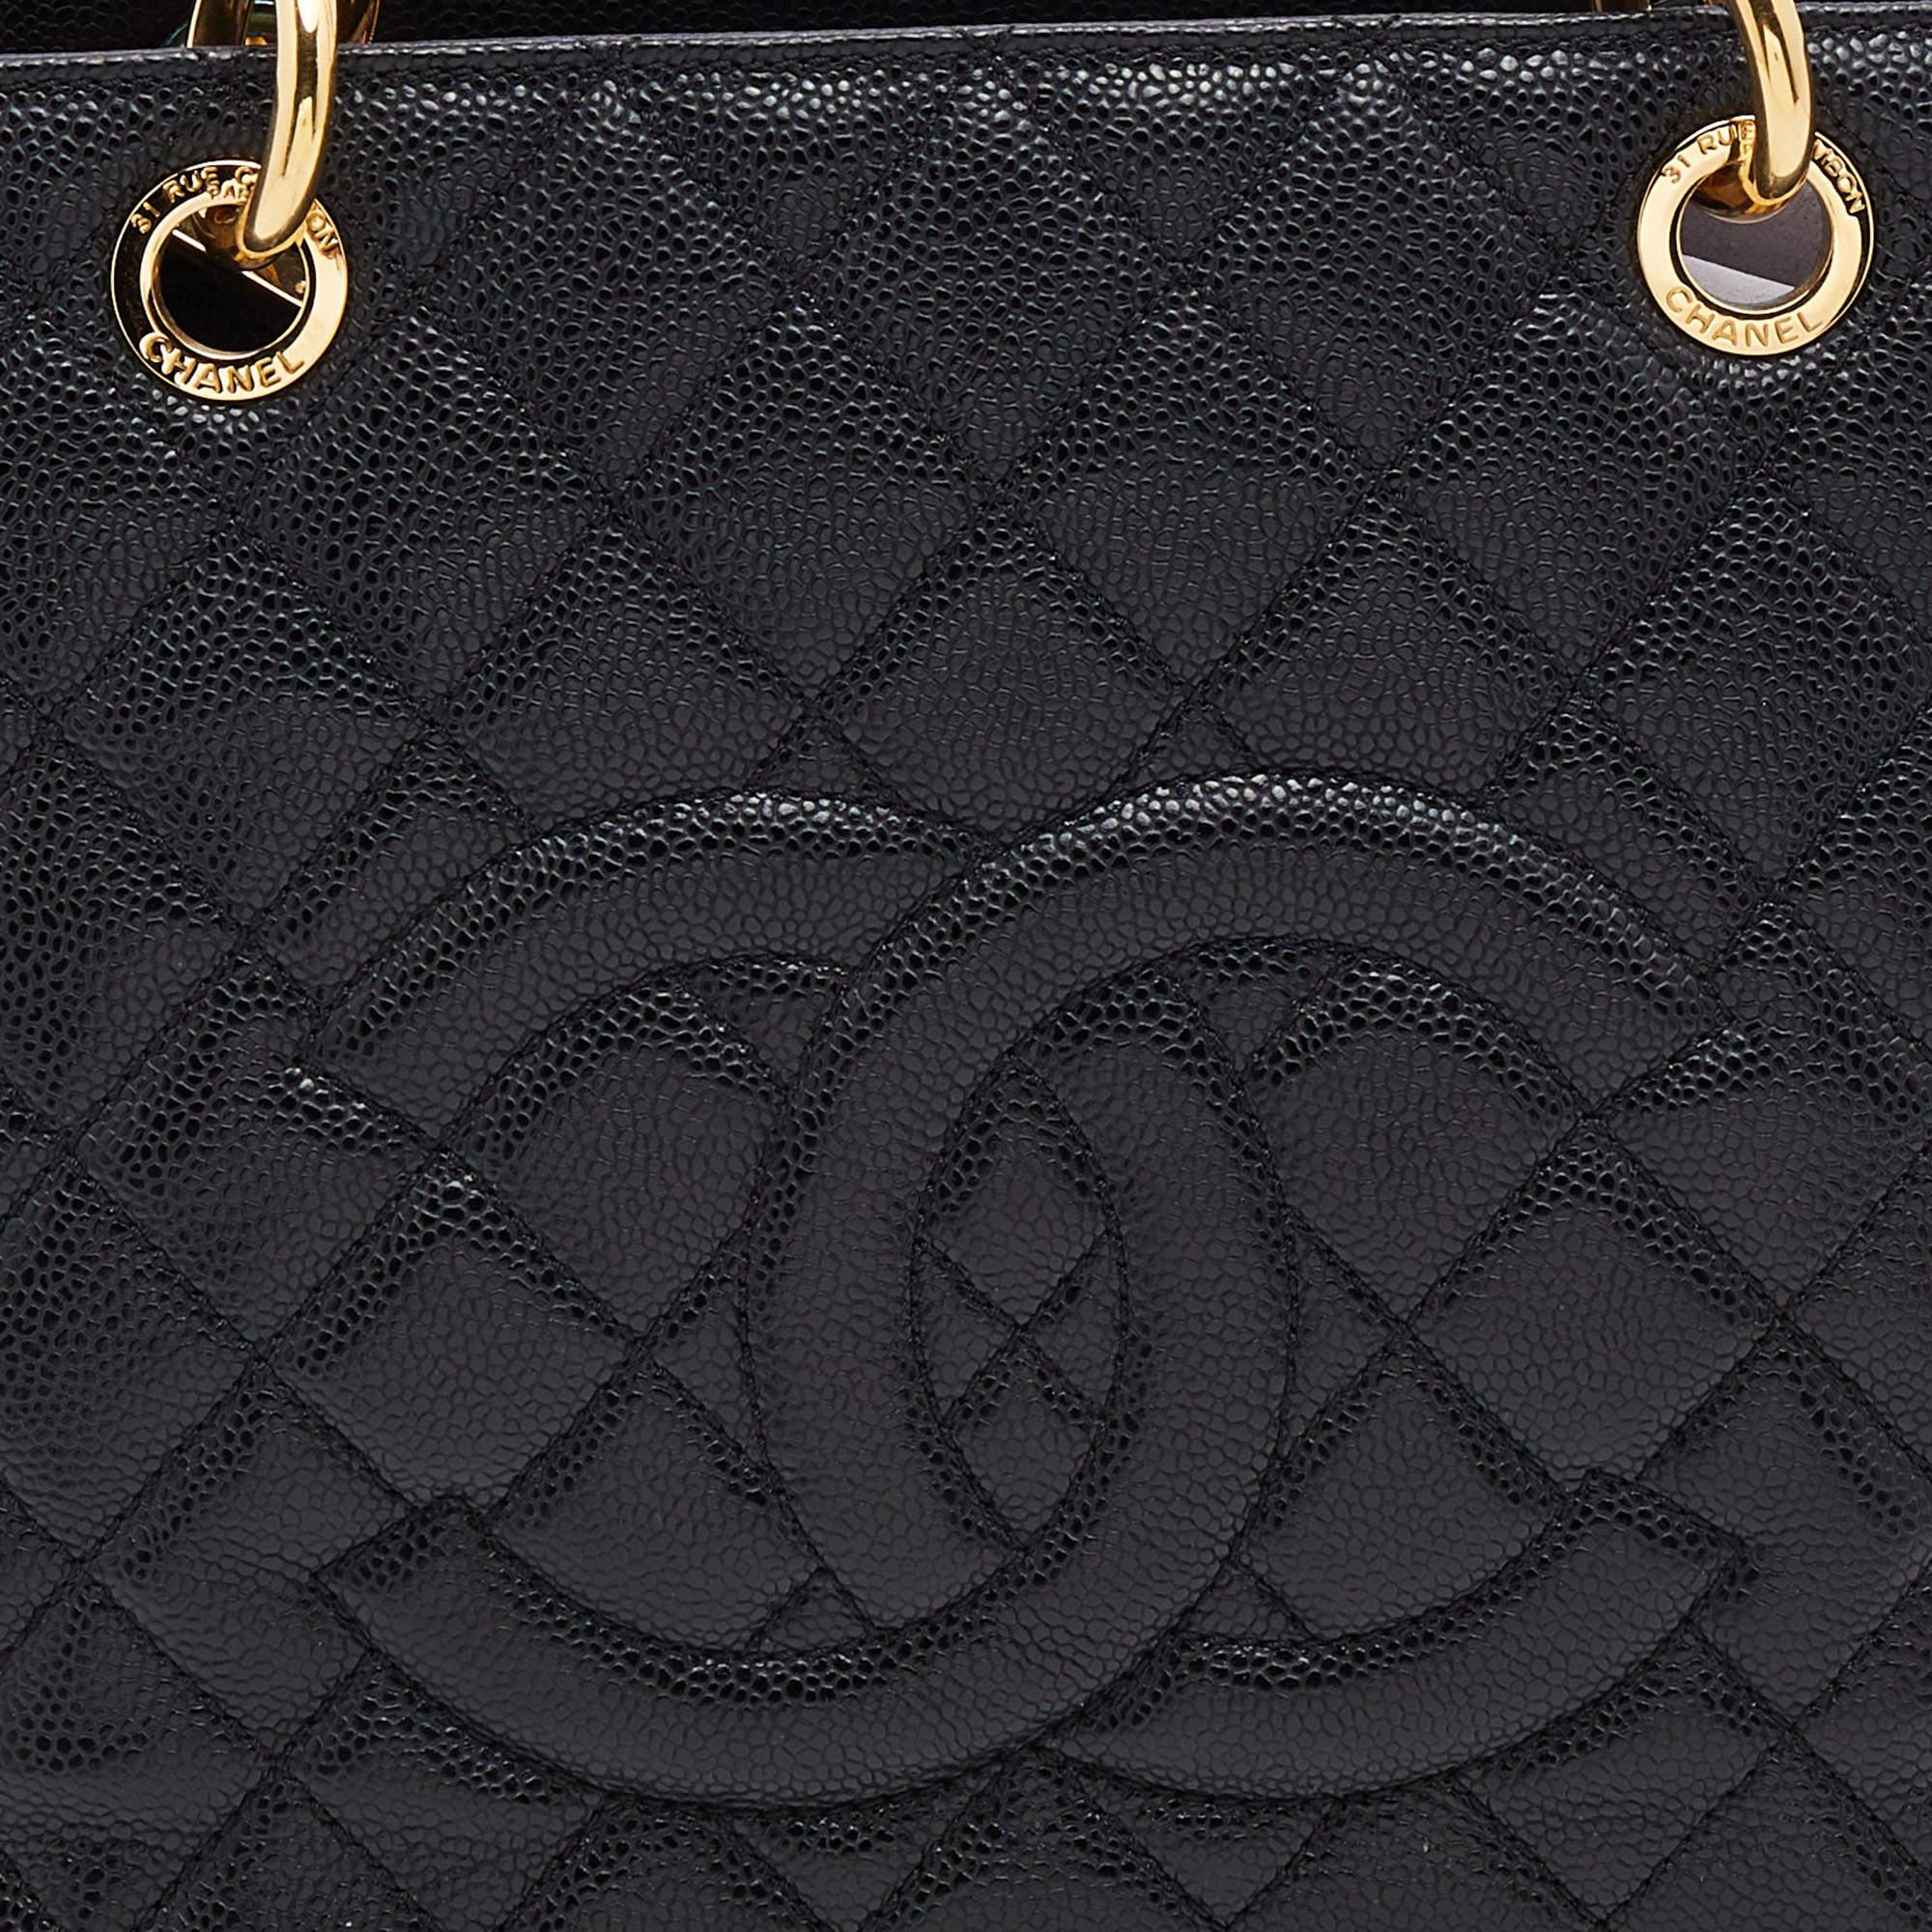 Chanel Black Quilted Caviar Leather GST Shopper Tote 11